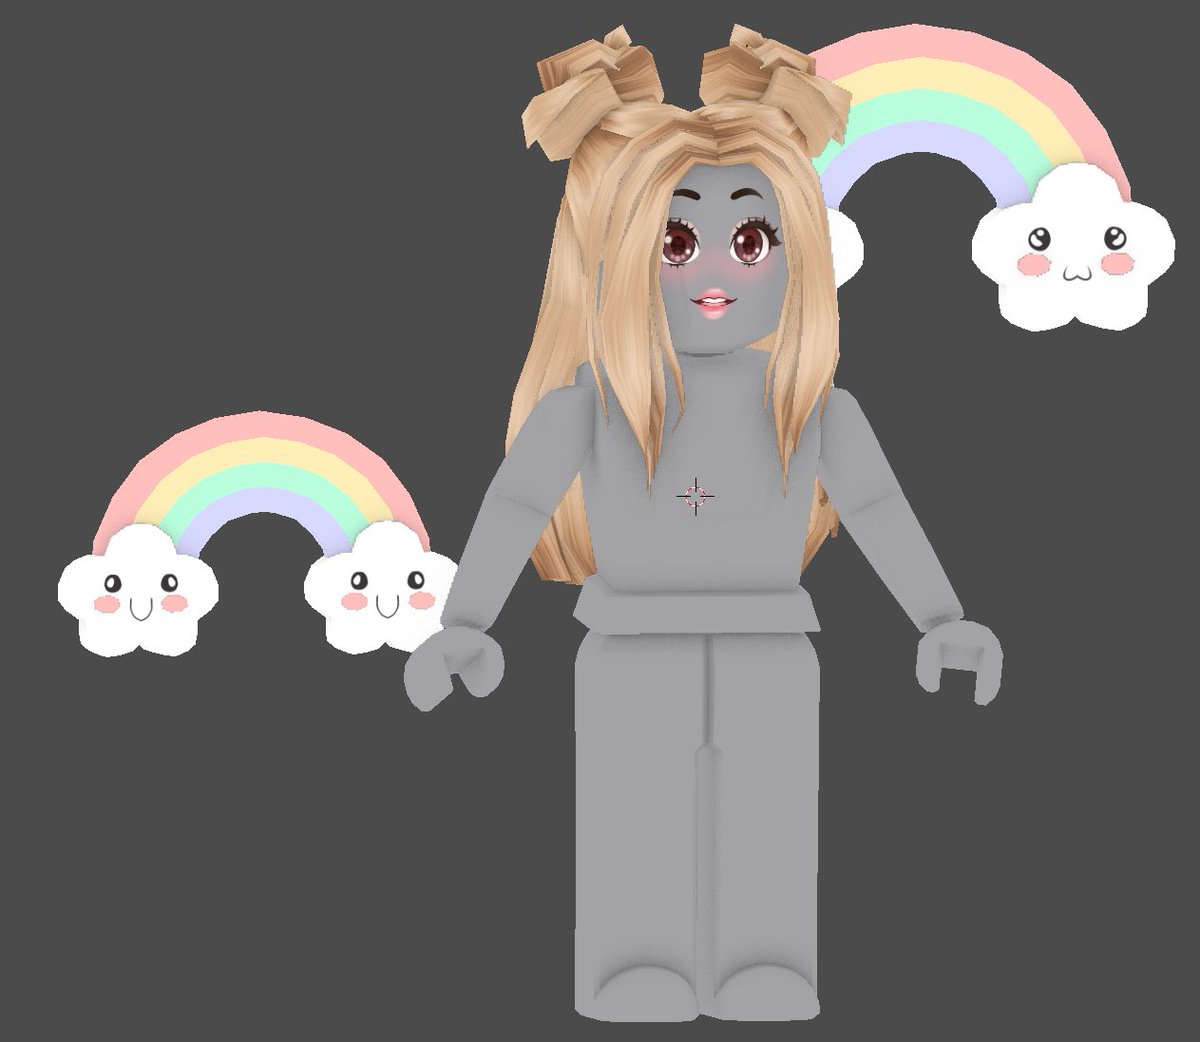 Softsas On Twitter I Love Rainbows And The Standard Color Of Rainbows Is Not My Style Pastel Rainbow Is Heavenly Ty - q_q profile roblox